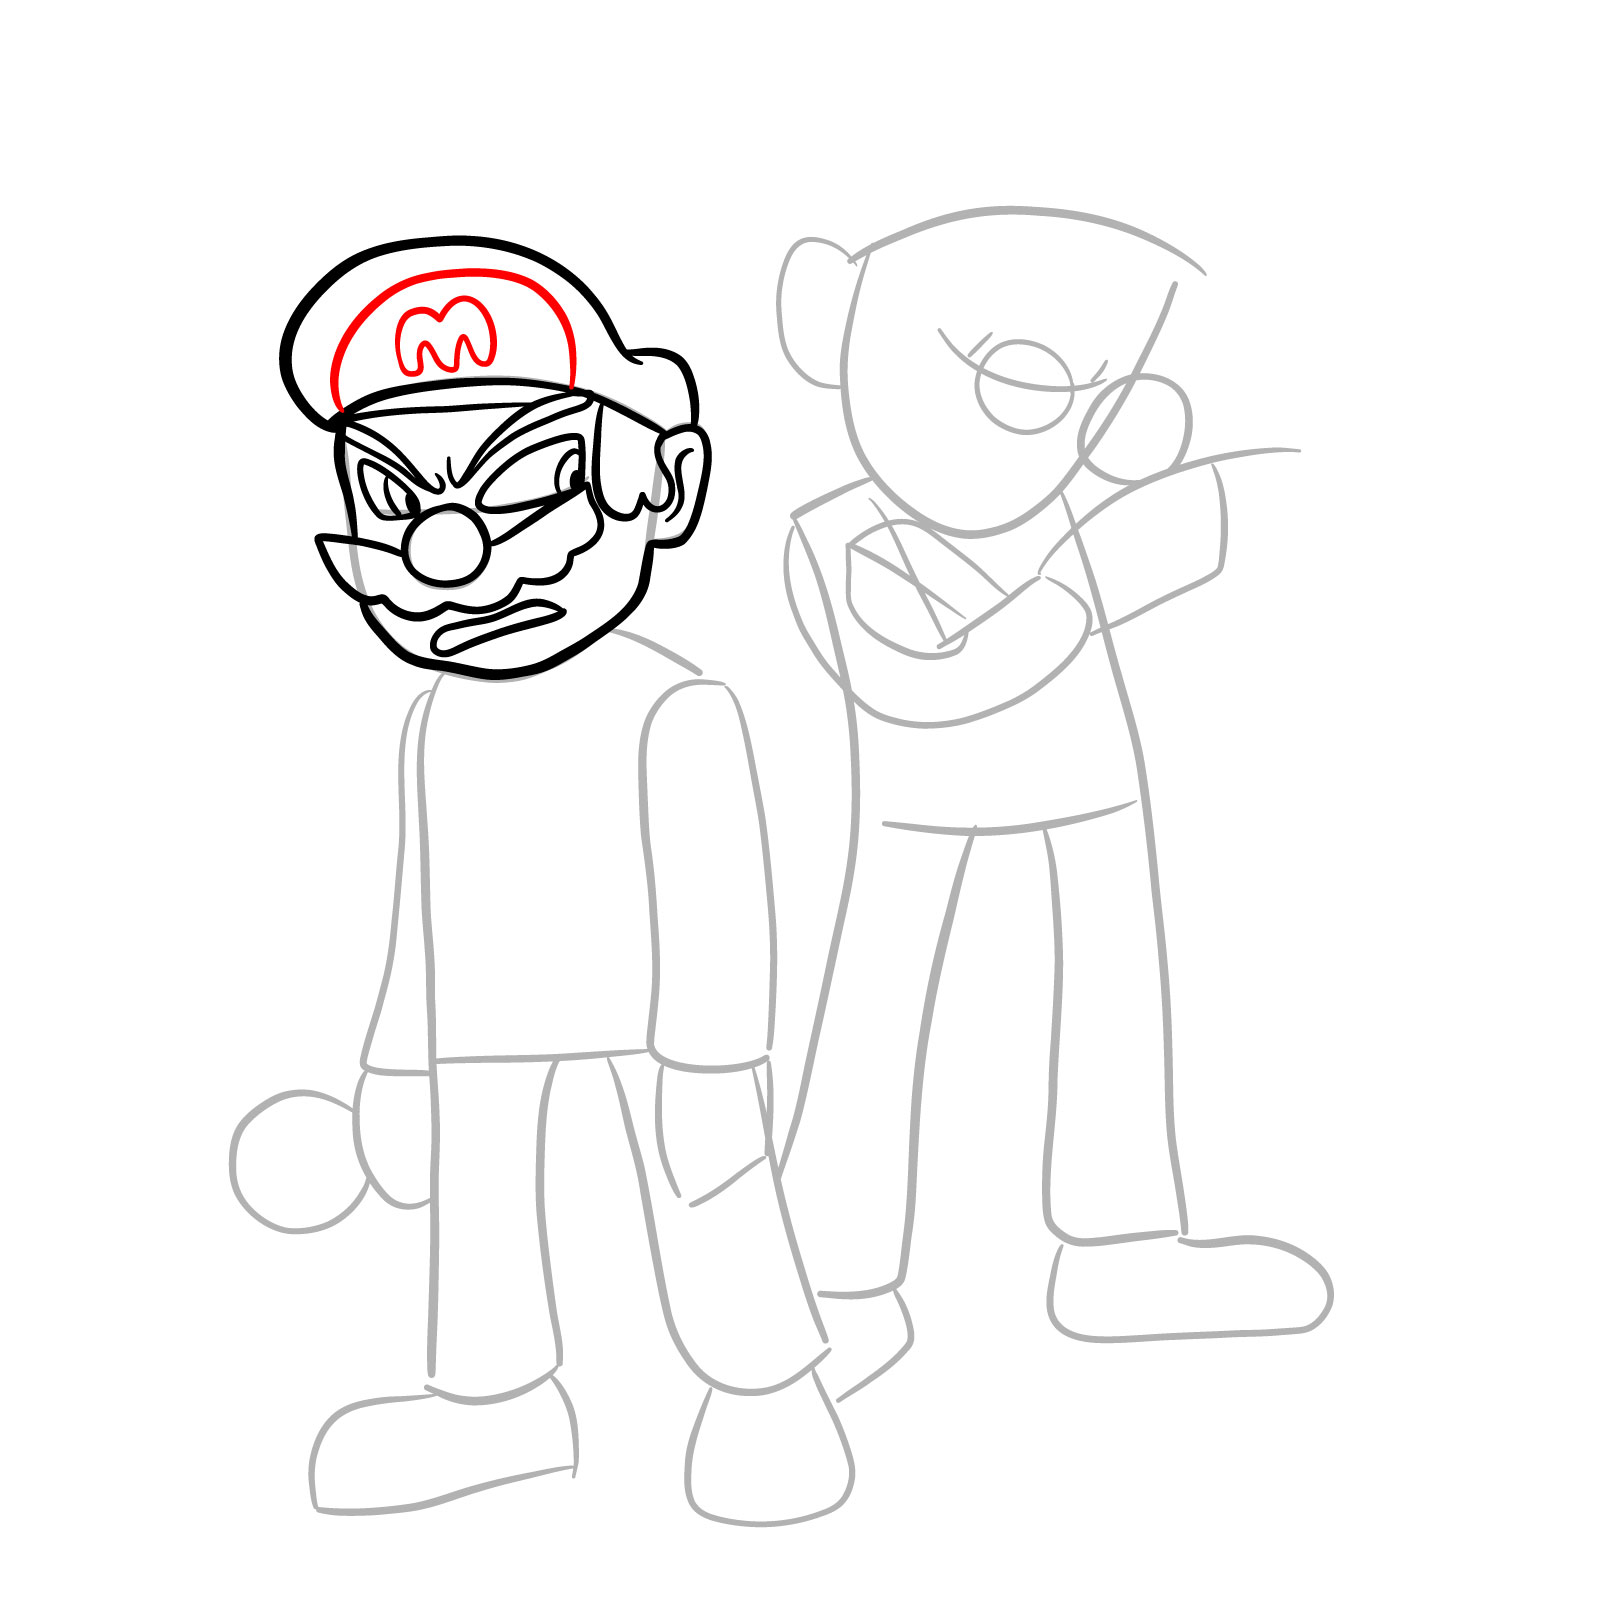 How to draw Mario and Luigi from Tails Gets Trolled - step 12